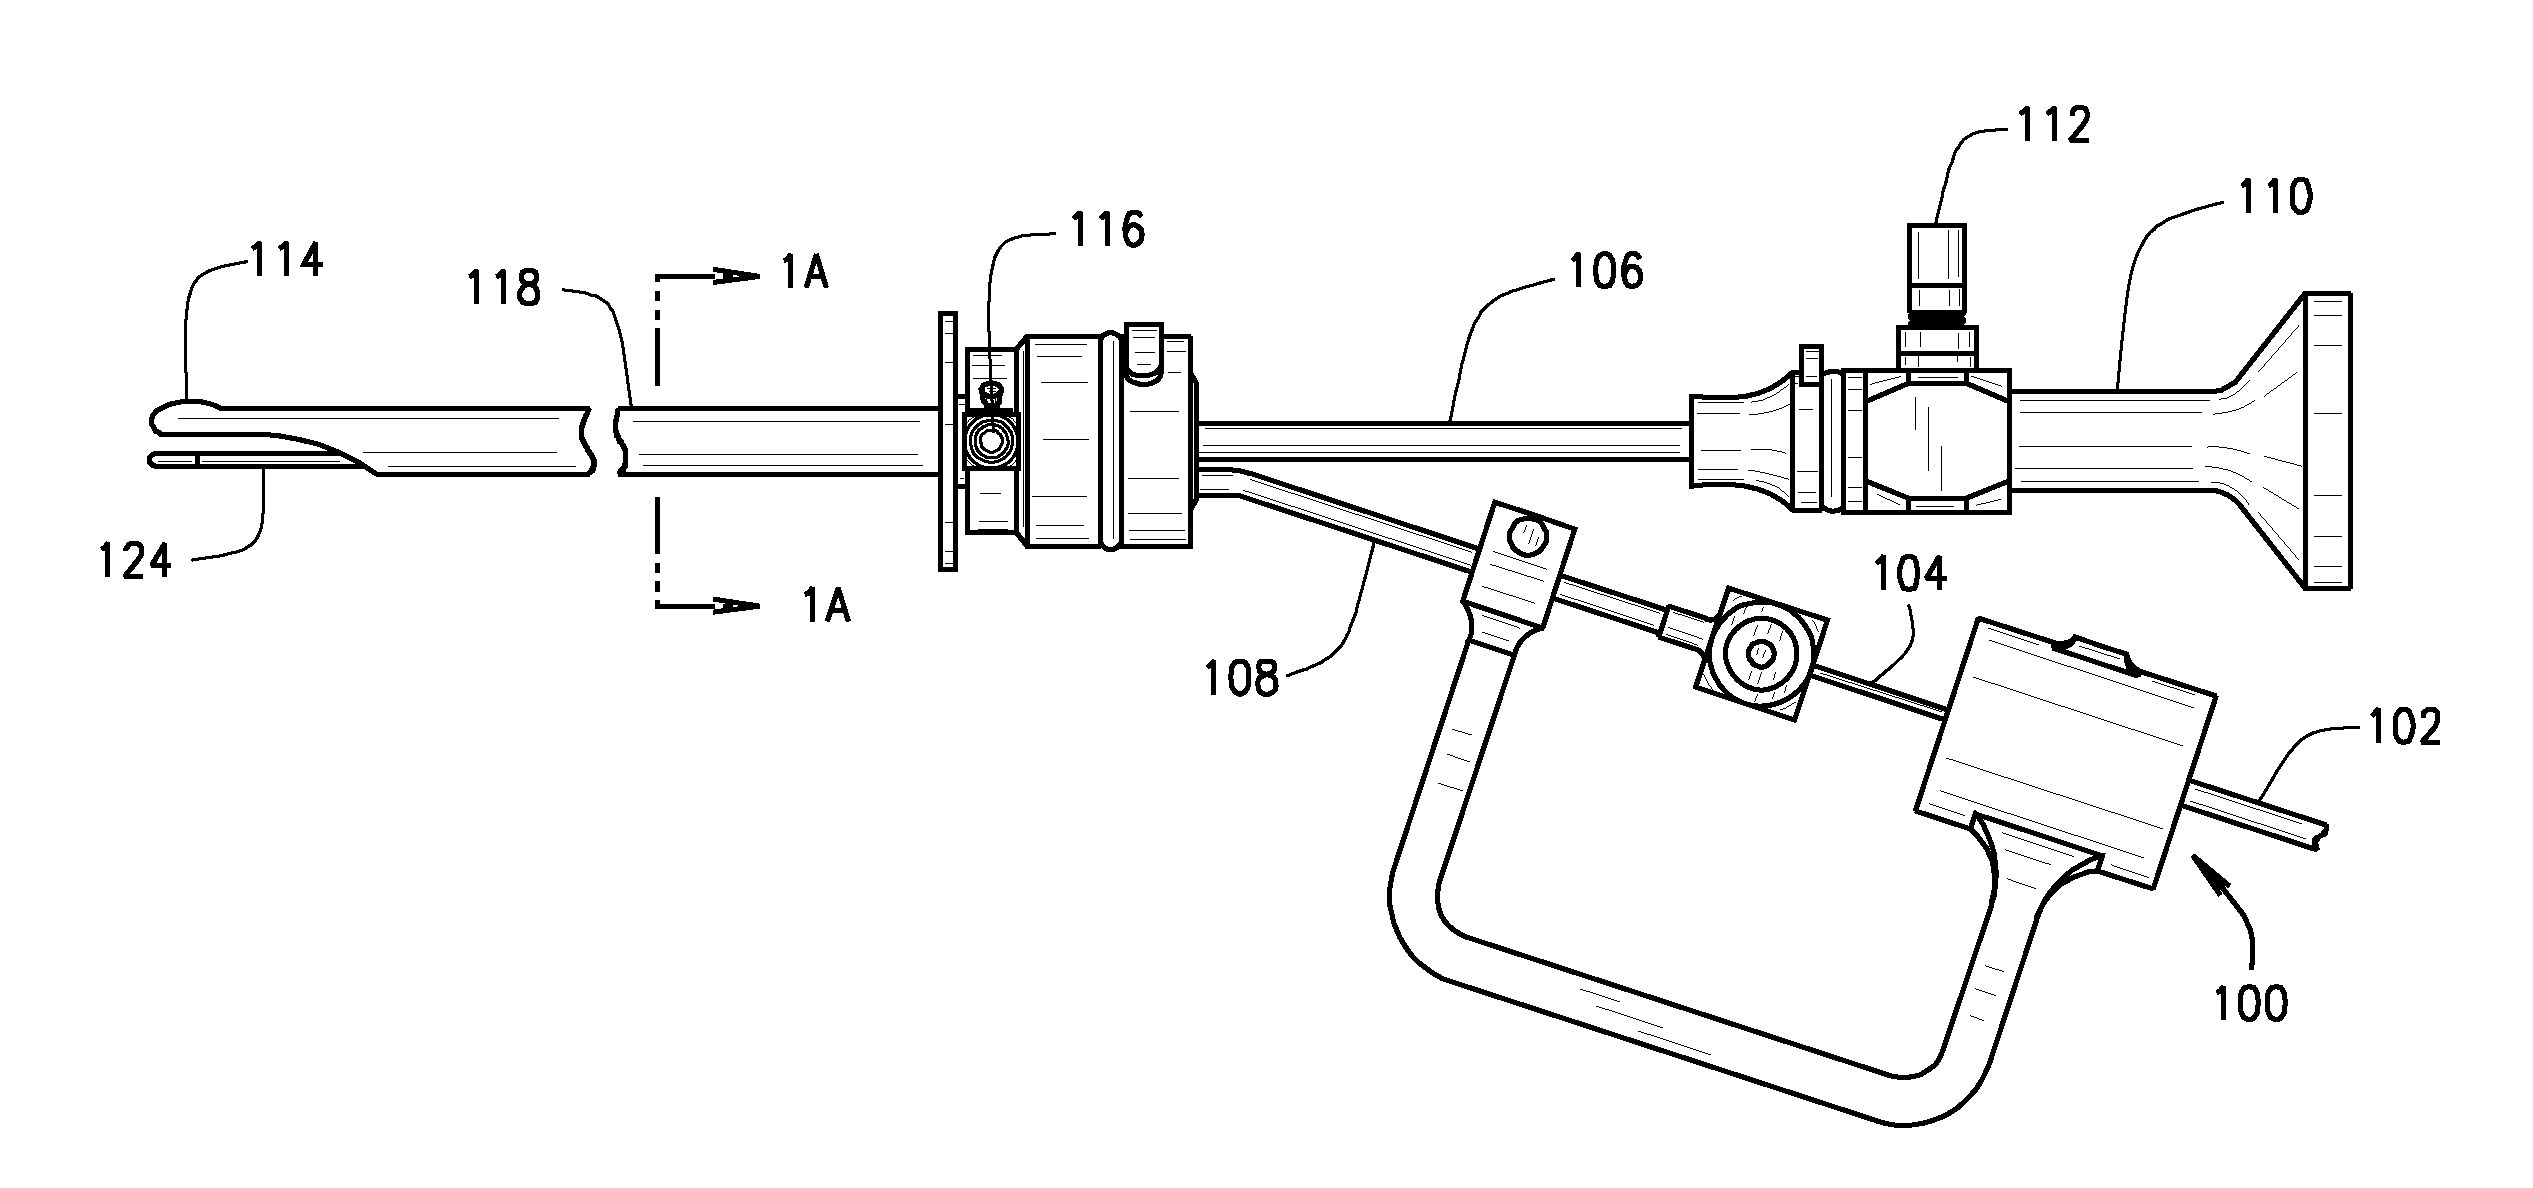 Laser surgery device and method